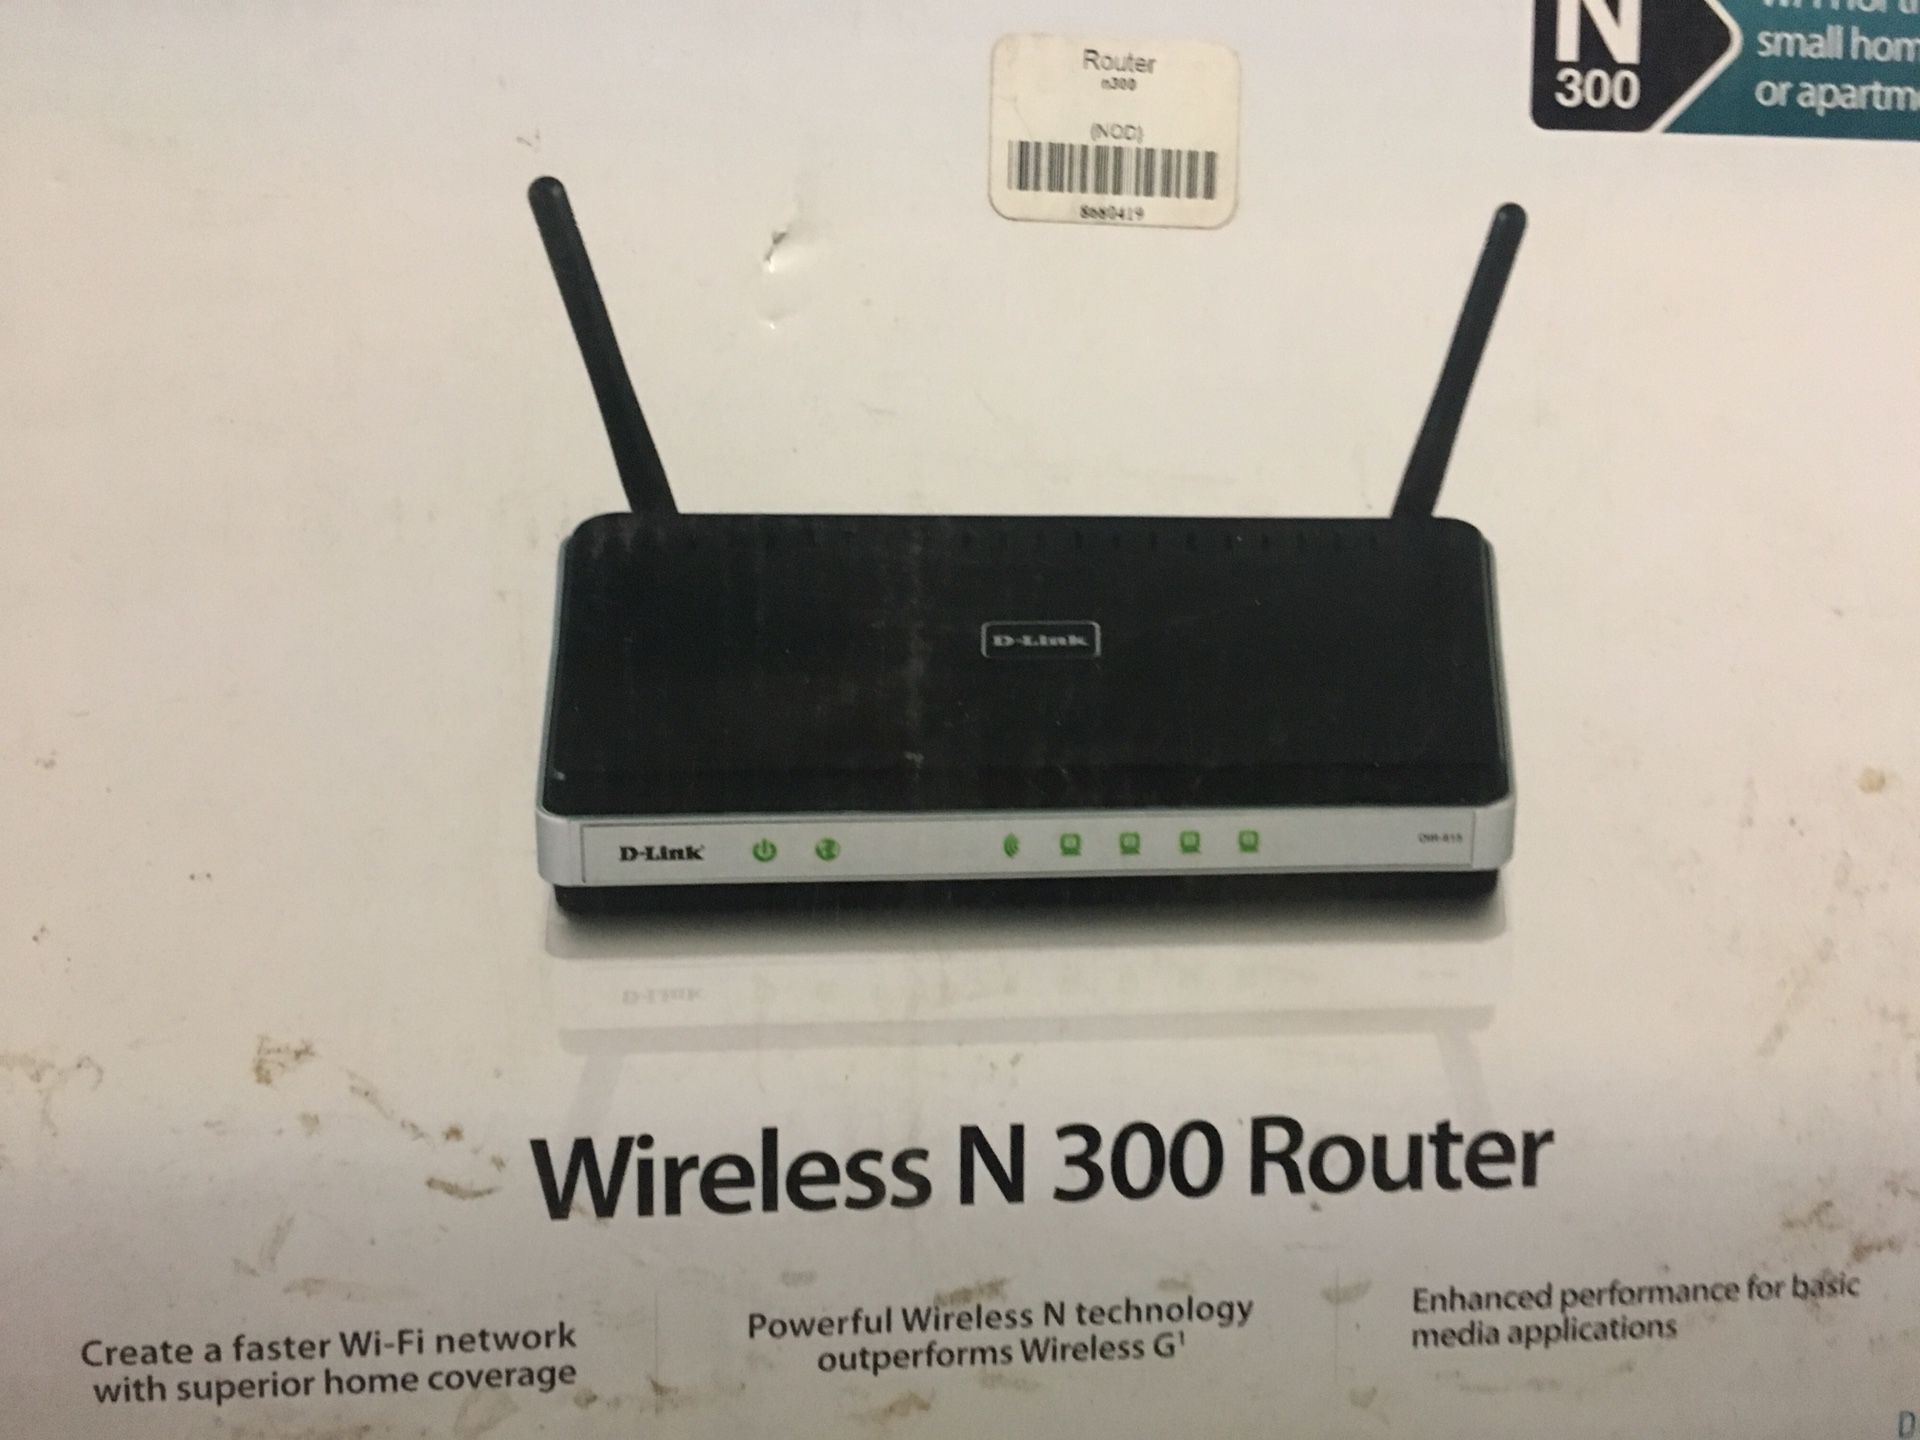 Wireless N 300 router